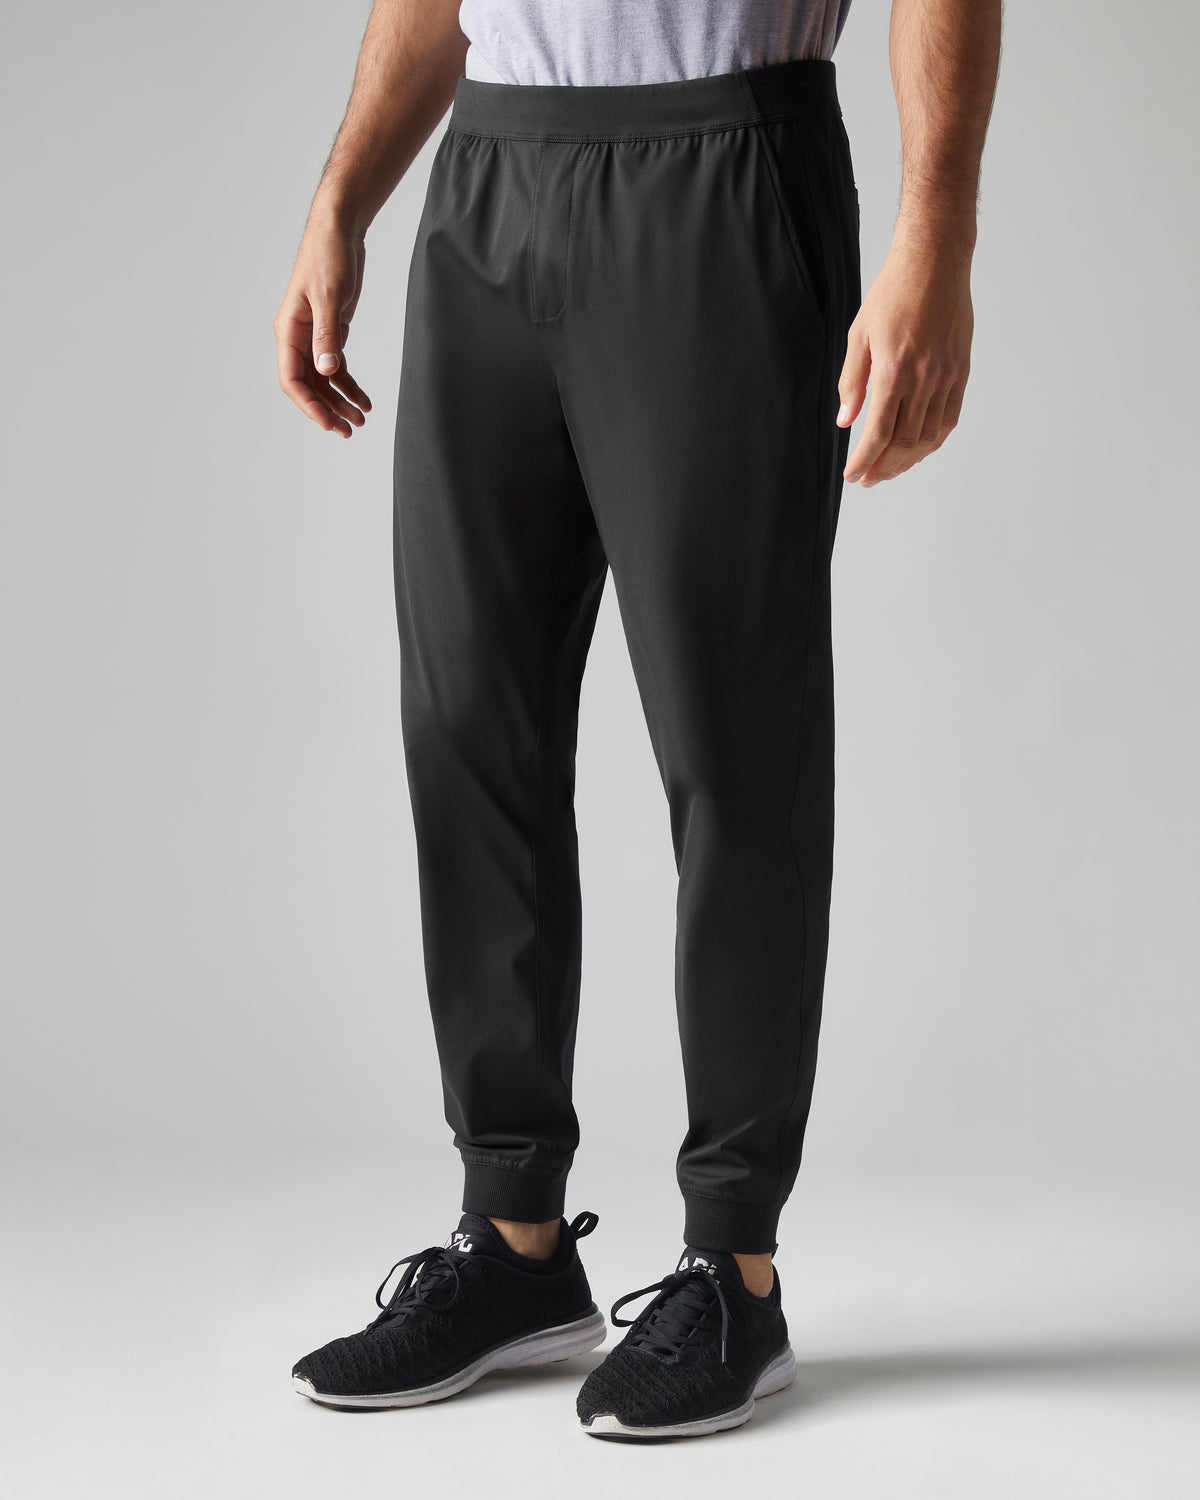 Brand New: Commuter Jogger, The all-new Commuter Jogger has LANDED!  Commuter comfort in a true tapered fit, what else could you ask for? It all  started with the Commuter Pant